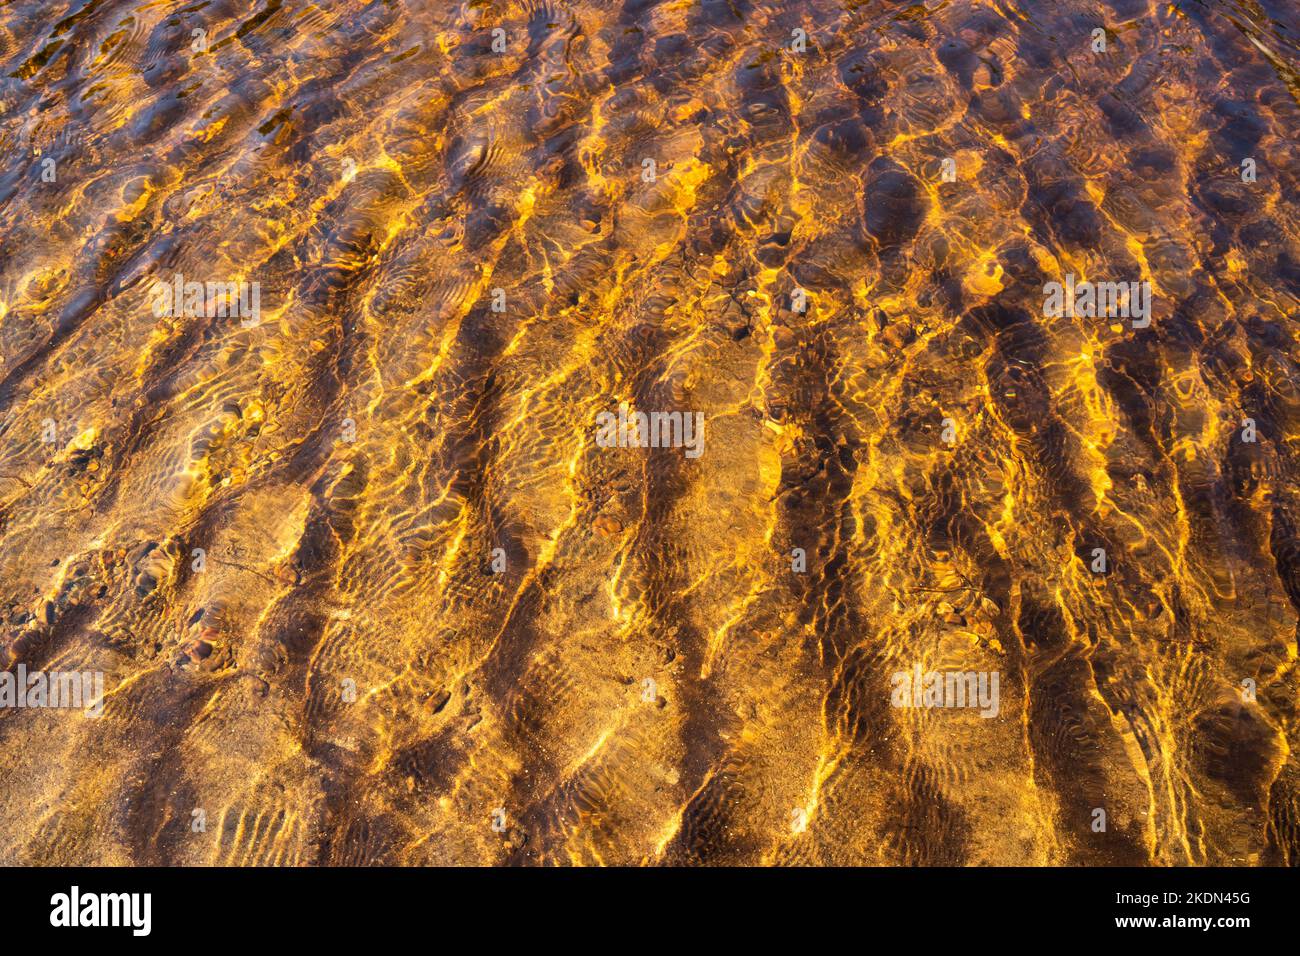 An abstract view to brownish water and sand beneath it. Shot in Oulanka National Park, Northern Finland. Stock Photo